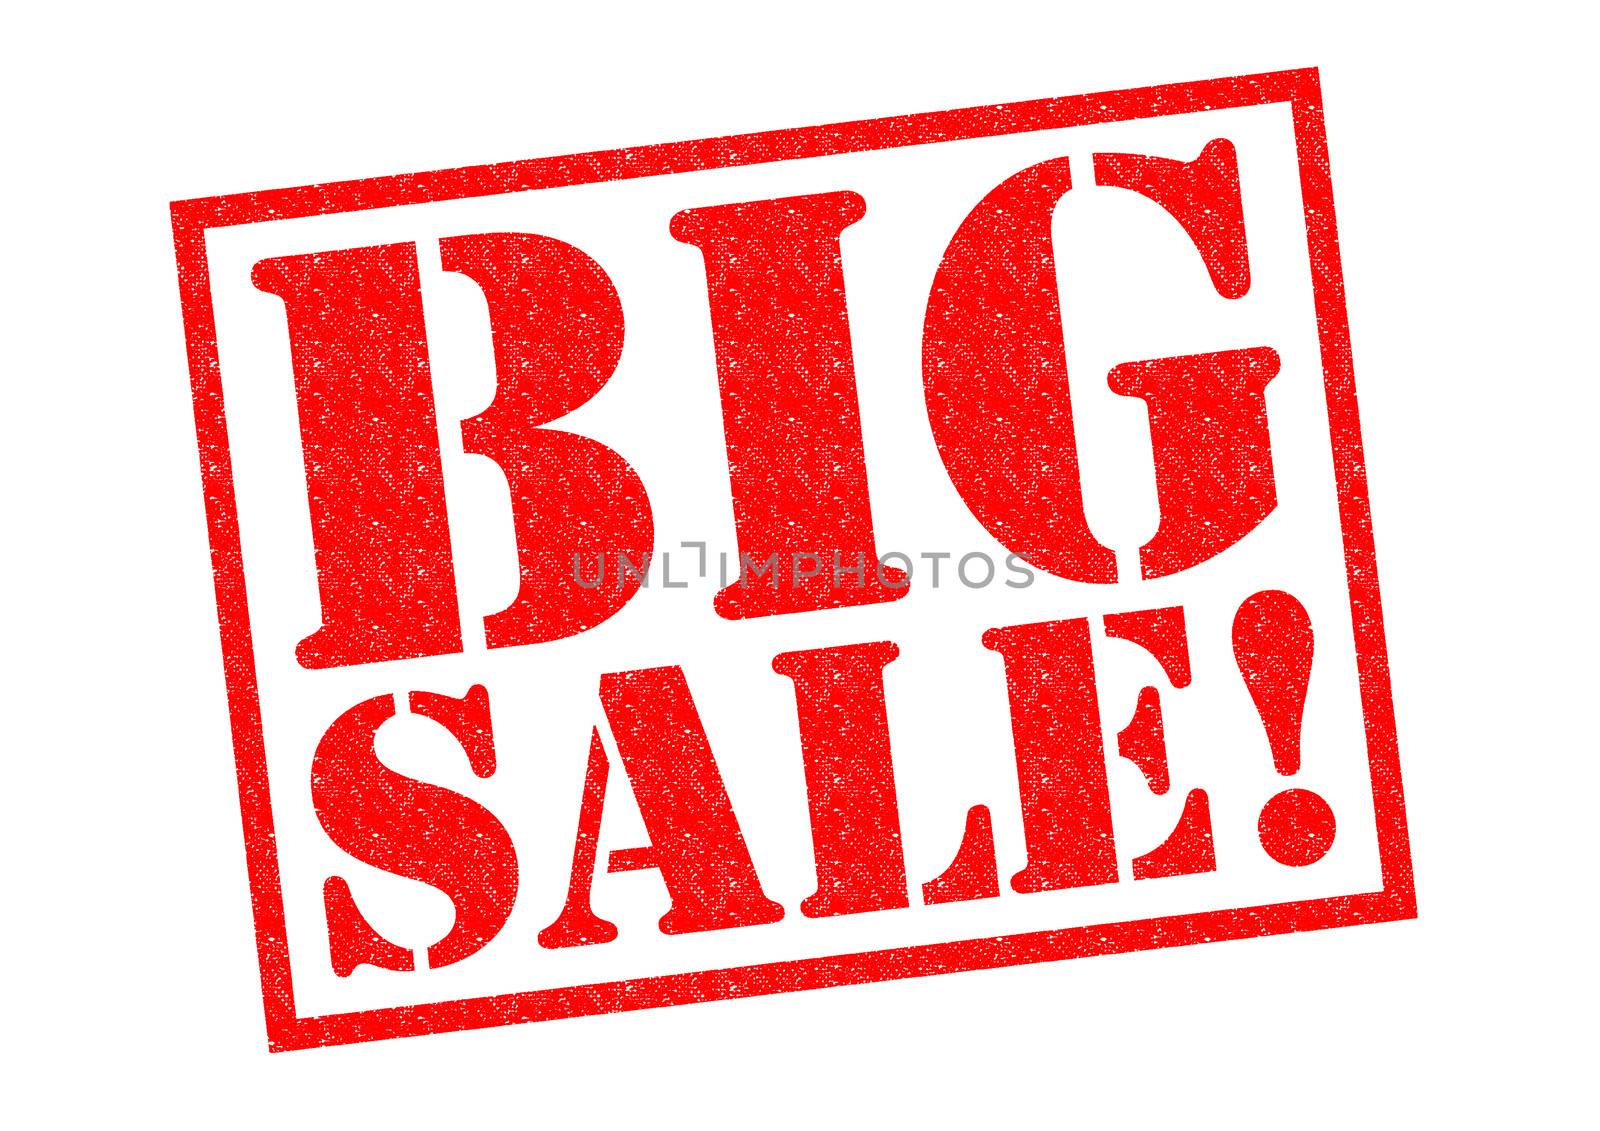 BIG SALE! red Rubber Stamp over a white background.